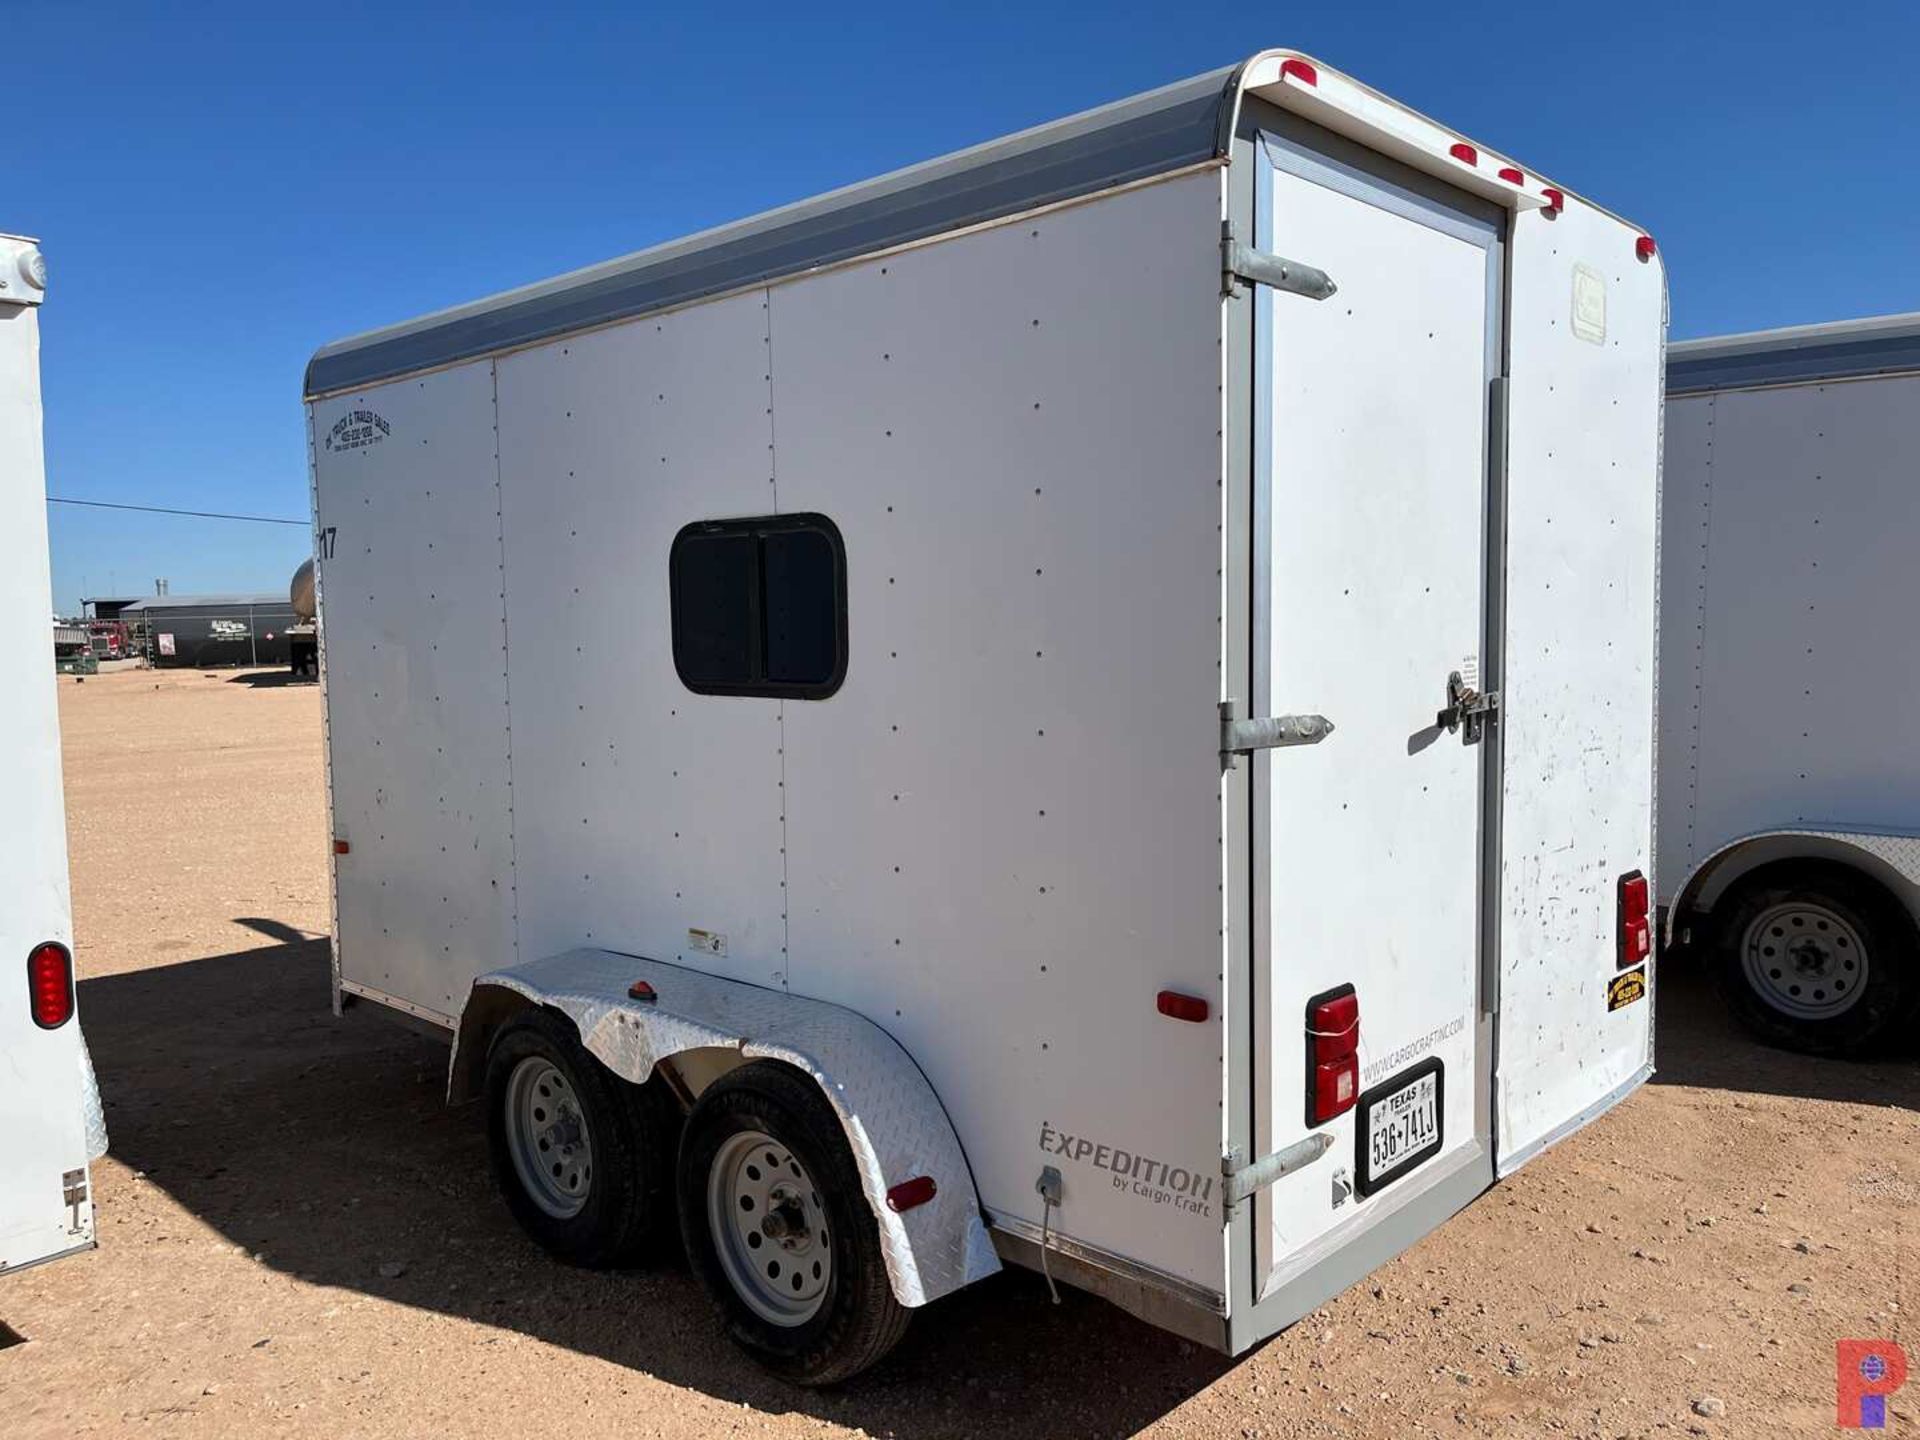 2015 CARGO CRAFT 12’ X 7’ T/A CREW TRAILER - Image 3 of 5